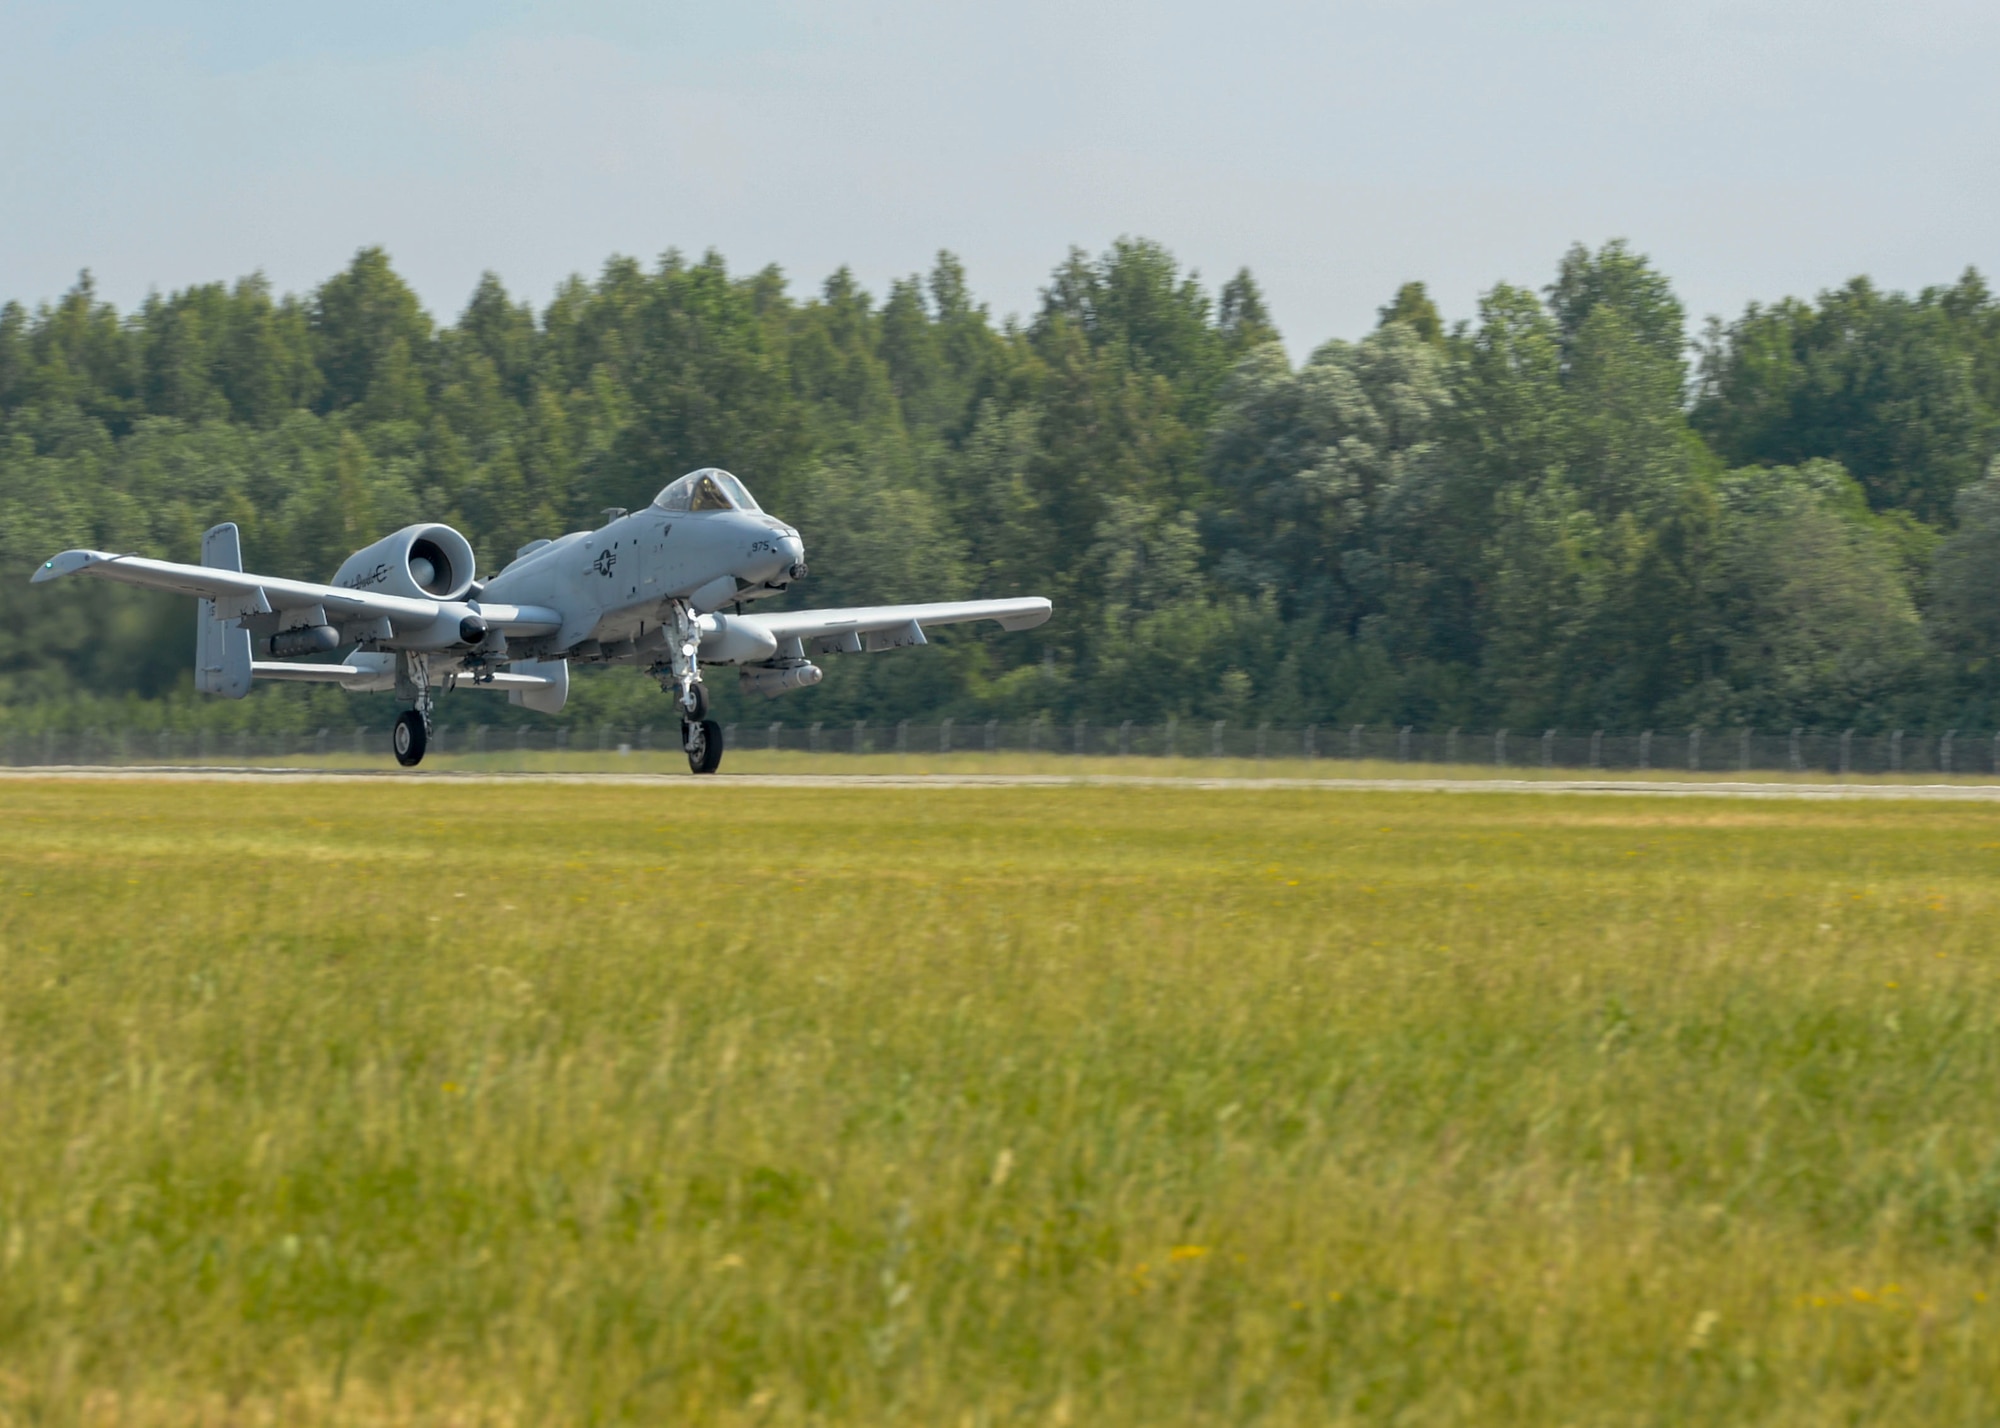 An A-10 Thunderbolt II takes-off from Lielvarde Air Base, Latvia, June 4, 2018.  A-10s were deployed to Europe from the 127th Wing at Selfridge Air National Guard Base, Michigan, to support exercise Saber Strike 18. While flying, A-10 pilots worked on close air support tactics and communication with Joint Terminal Attack Controllers to combine air and land capabilities for U.S. and partnered nations. (U.S. Air Force photo by Staff Sgt. Jimmie D. Pike)